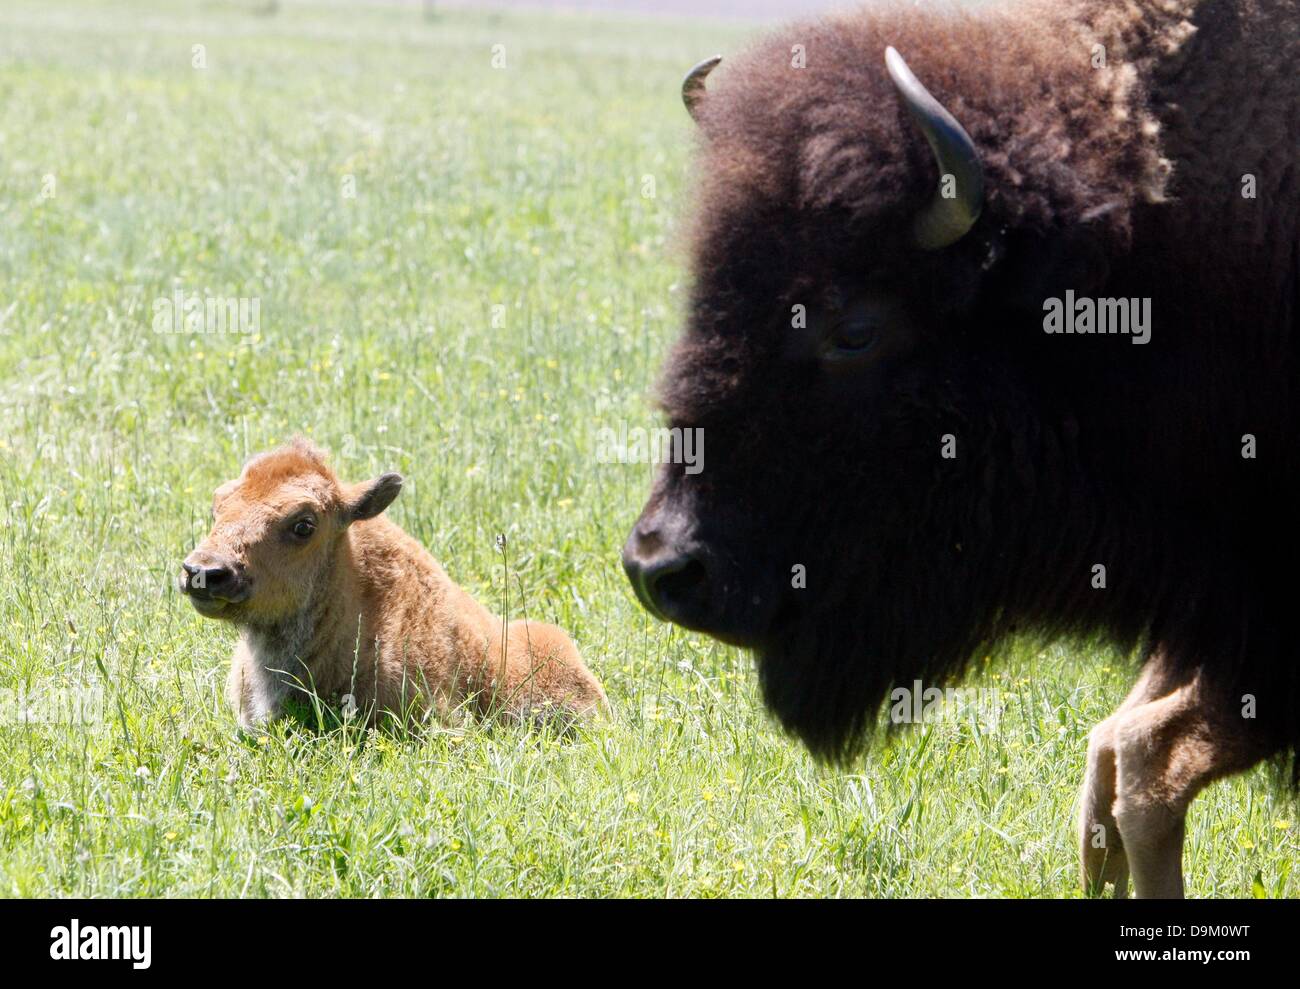 May 24, 2013 - Memphis, Tennessee, U.S. - June 19, 2013 - Baby buffalo and their mothers graze, sleep and cool off in the lake at Shelby Farms. The Shelby Farms Park buffalo herd now numbers 24, thanks to the birth of 7 baby buffalo this summer. ItÌ¢‰âÂ‰ã¢s estimated that 30-60 million buffalo once roamed North America, including Tennessee.  They were central and sacred to the lives of American Indians and were almost hunted to extinction. (Credit Image: © Karen Pulfer Focht/The Commercial Appeal/ZUMAPRESS.com) Stock Photo